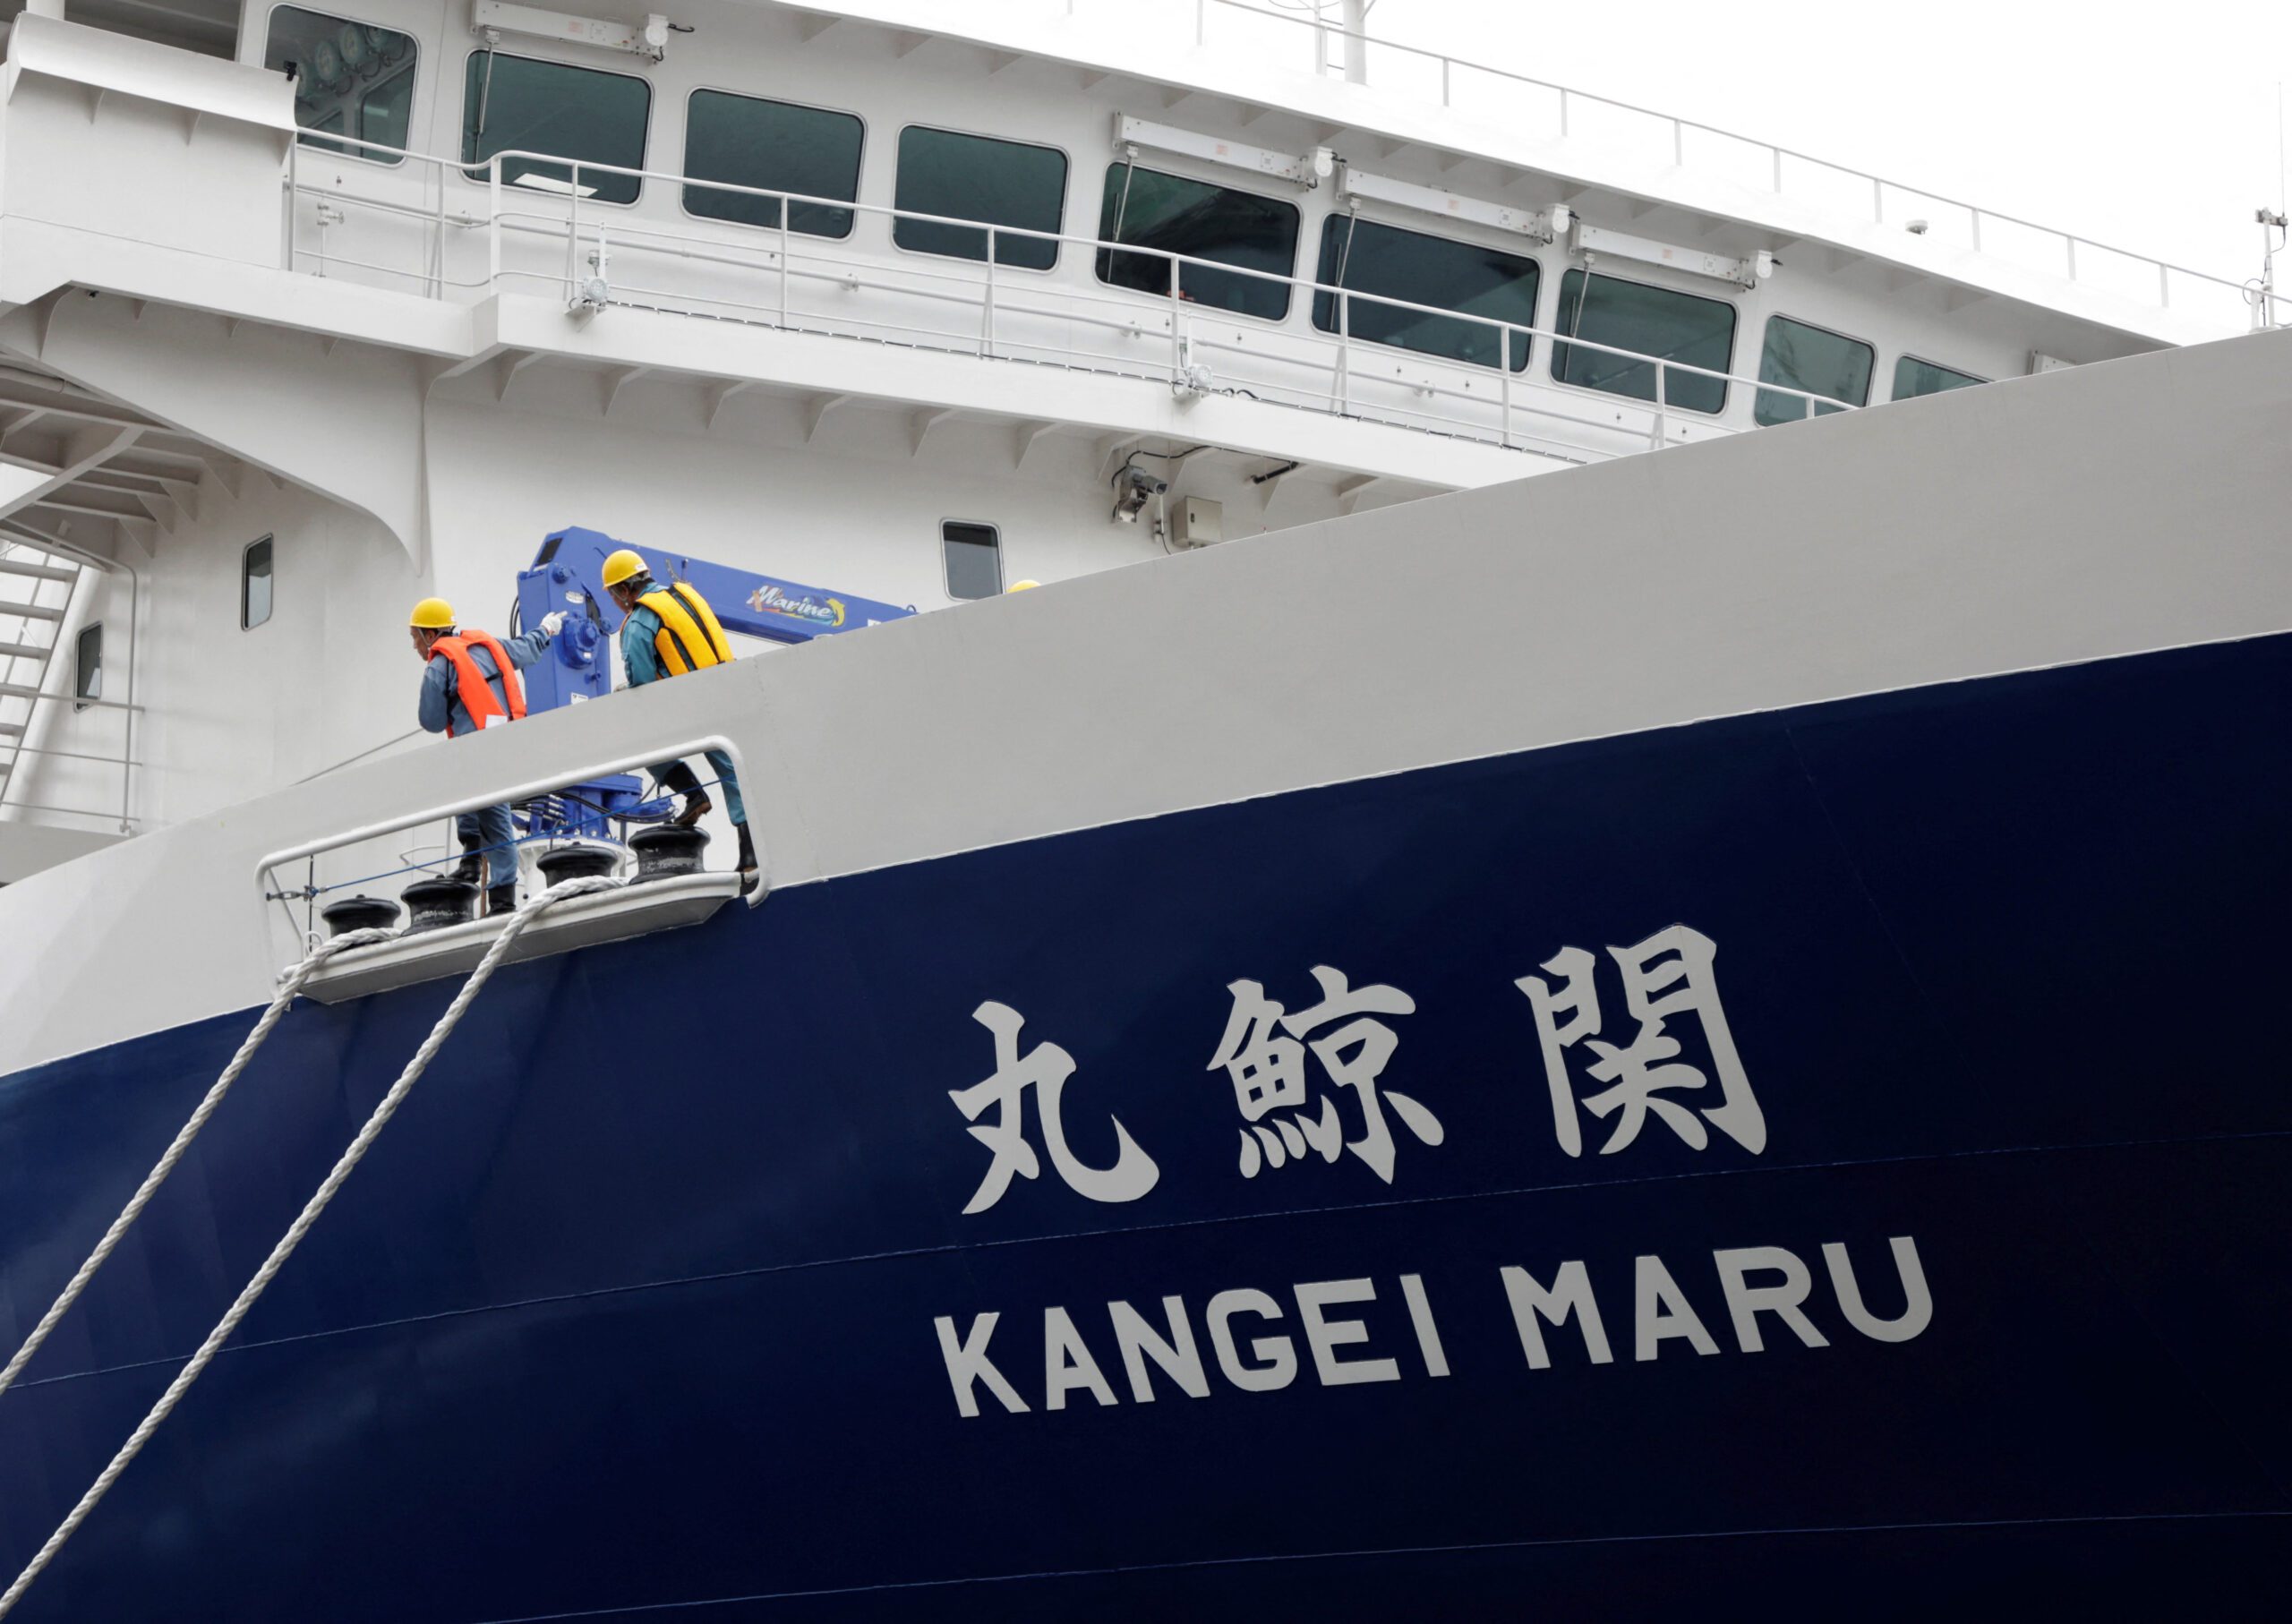 The newest addition to Japan's whaling fleet, the Kangei Maru, arrives at a port in Tokyo. REUTERS/Tom Bateman